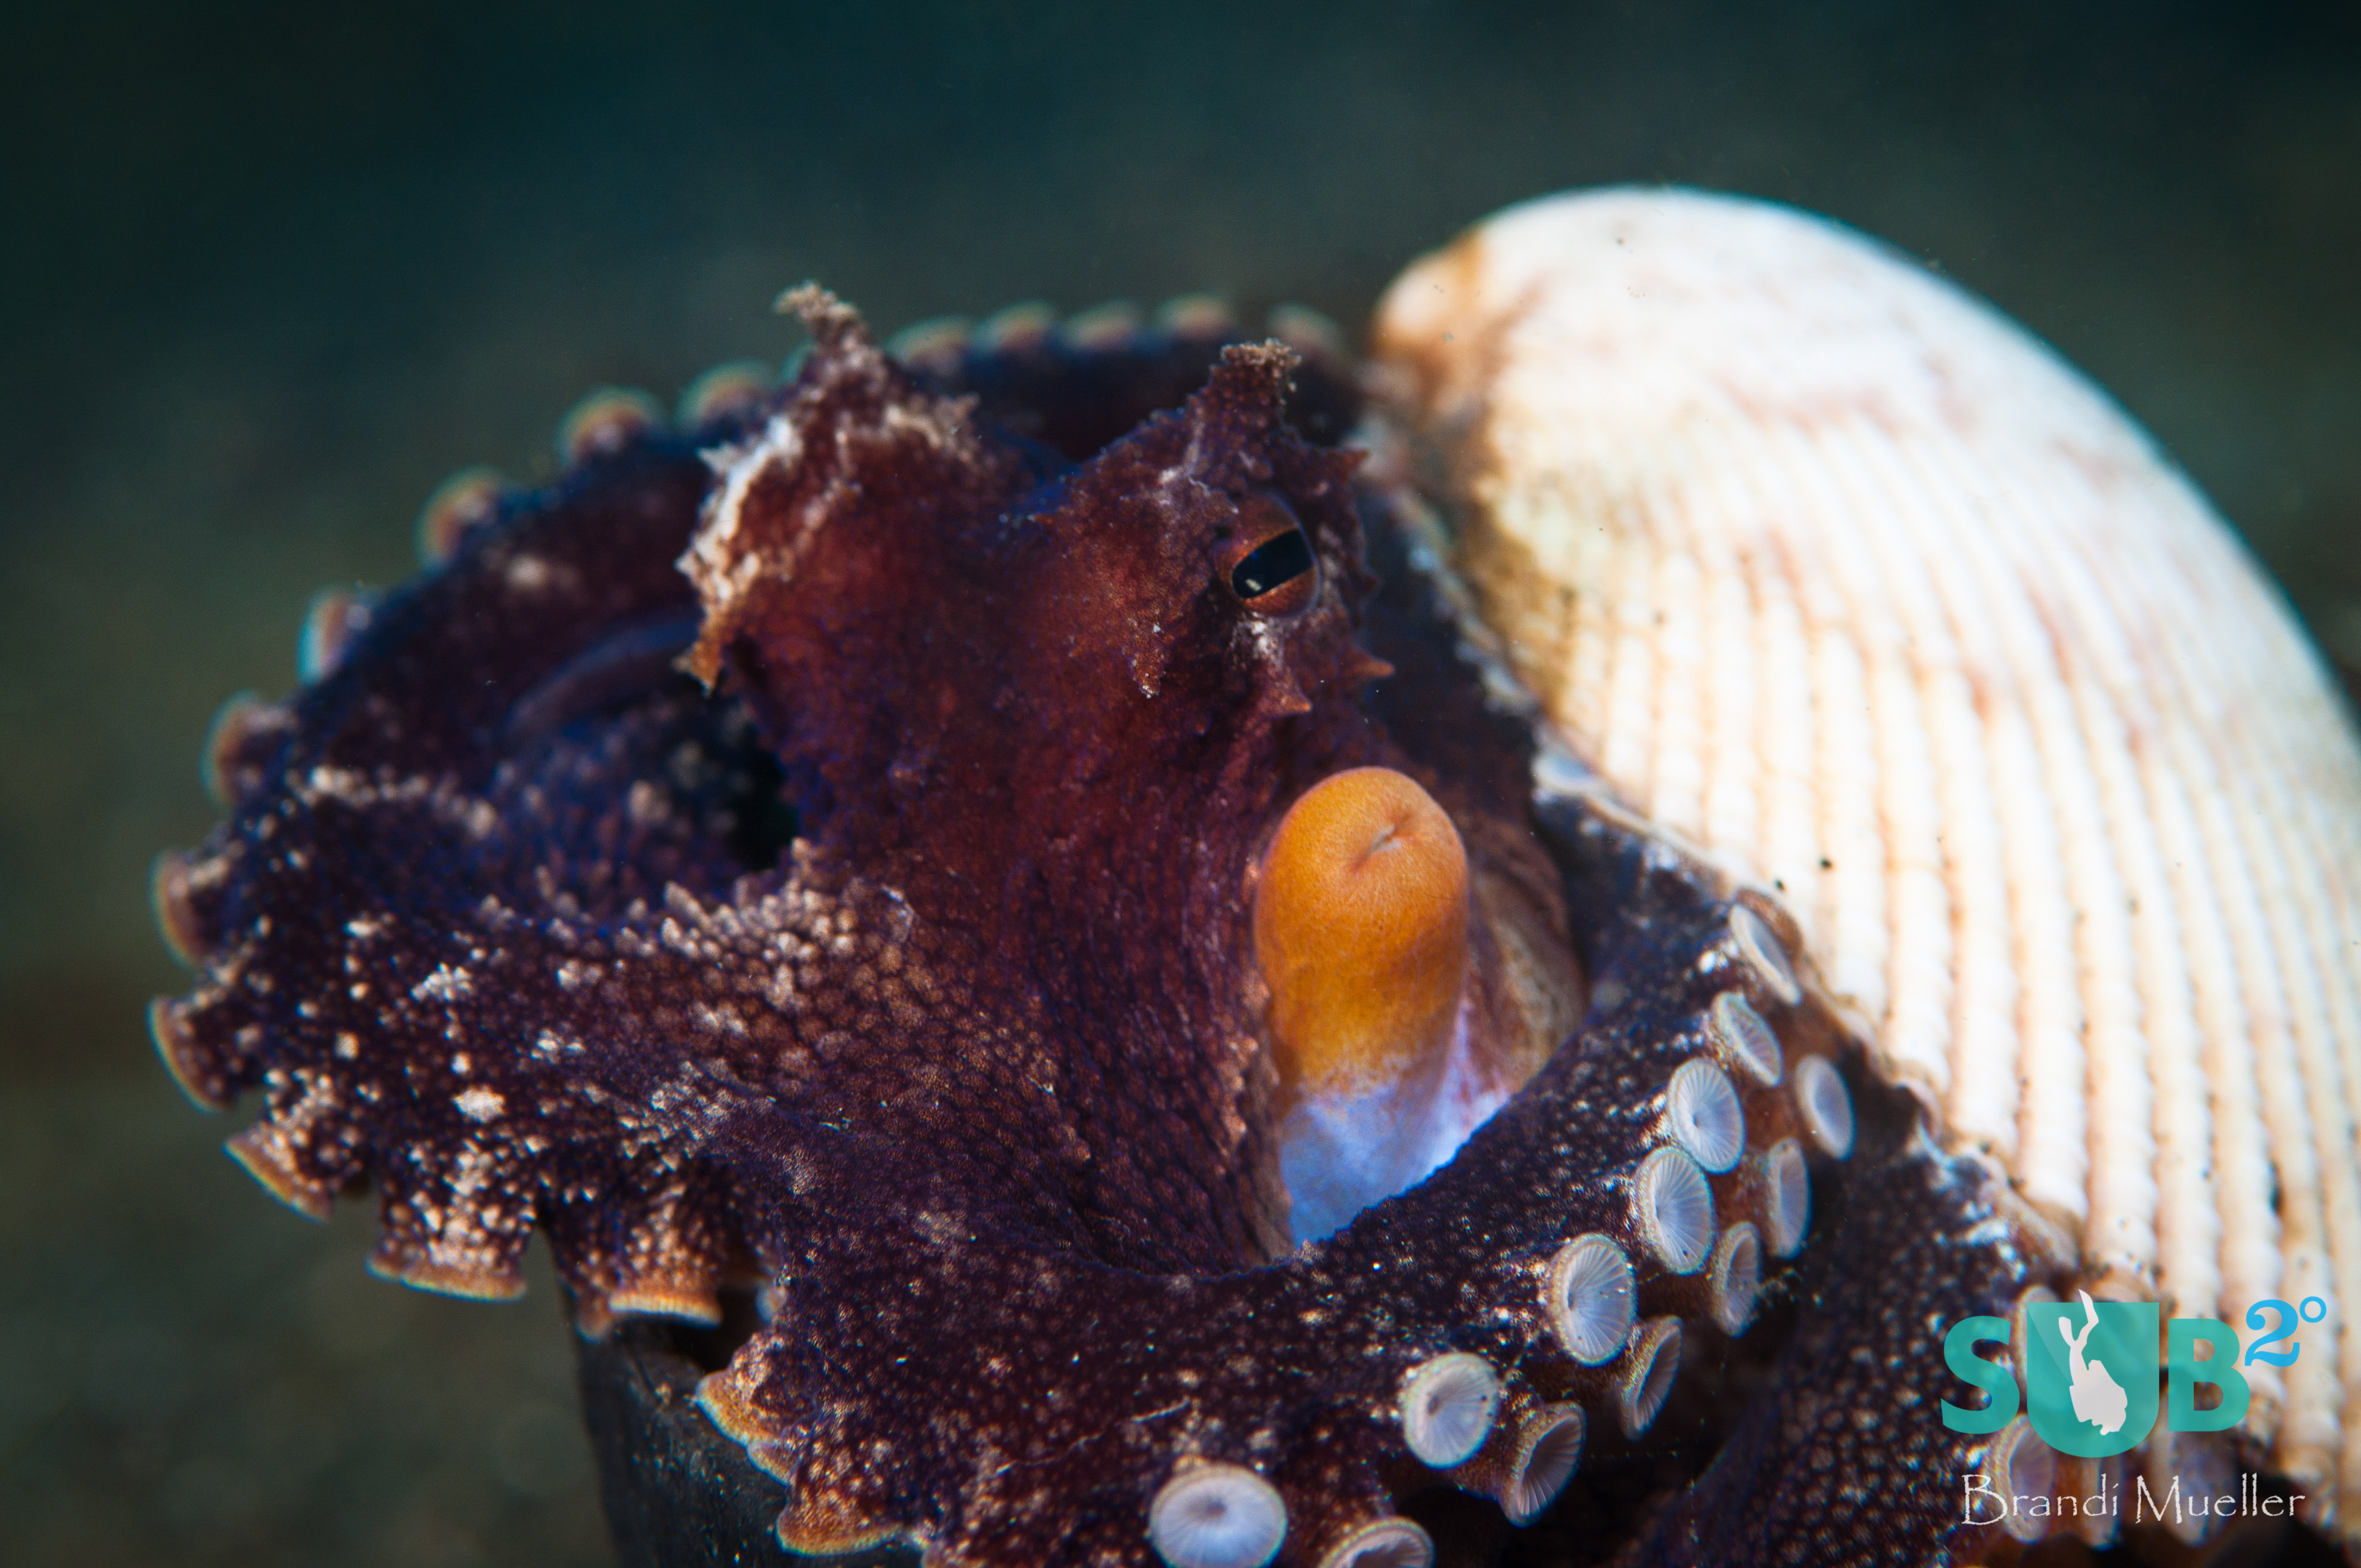 The shell of a coconut as a home and a shell as a cover - the coconut octopus (also known as the veined octopus) makes itself a shelter.